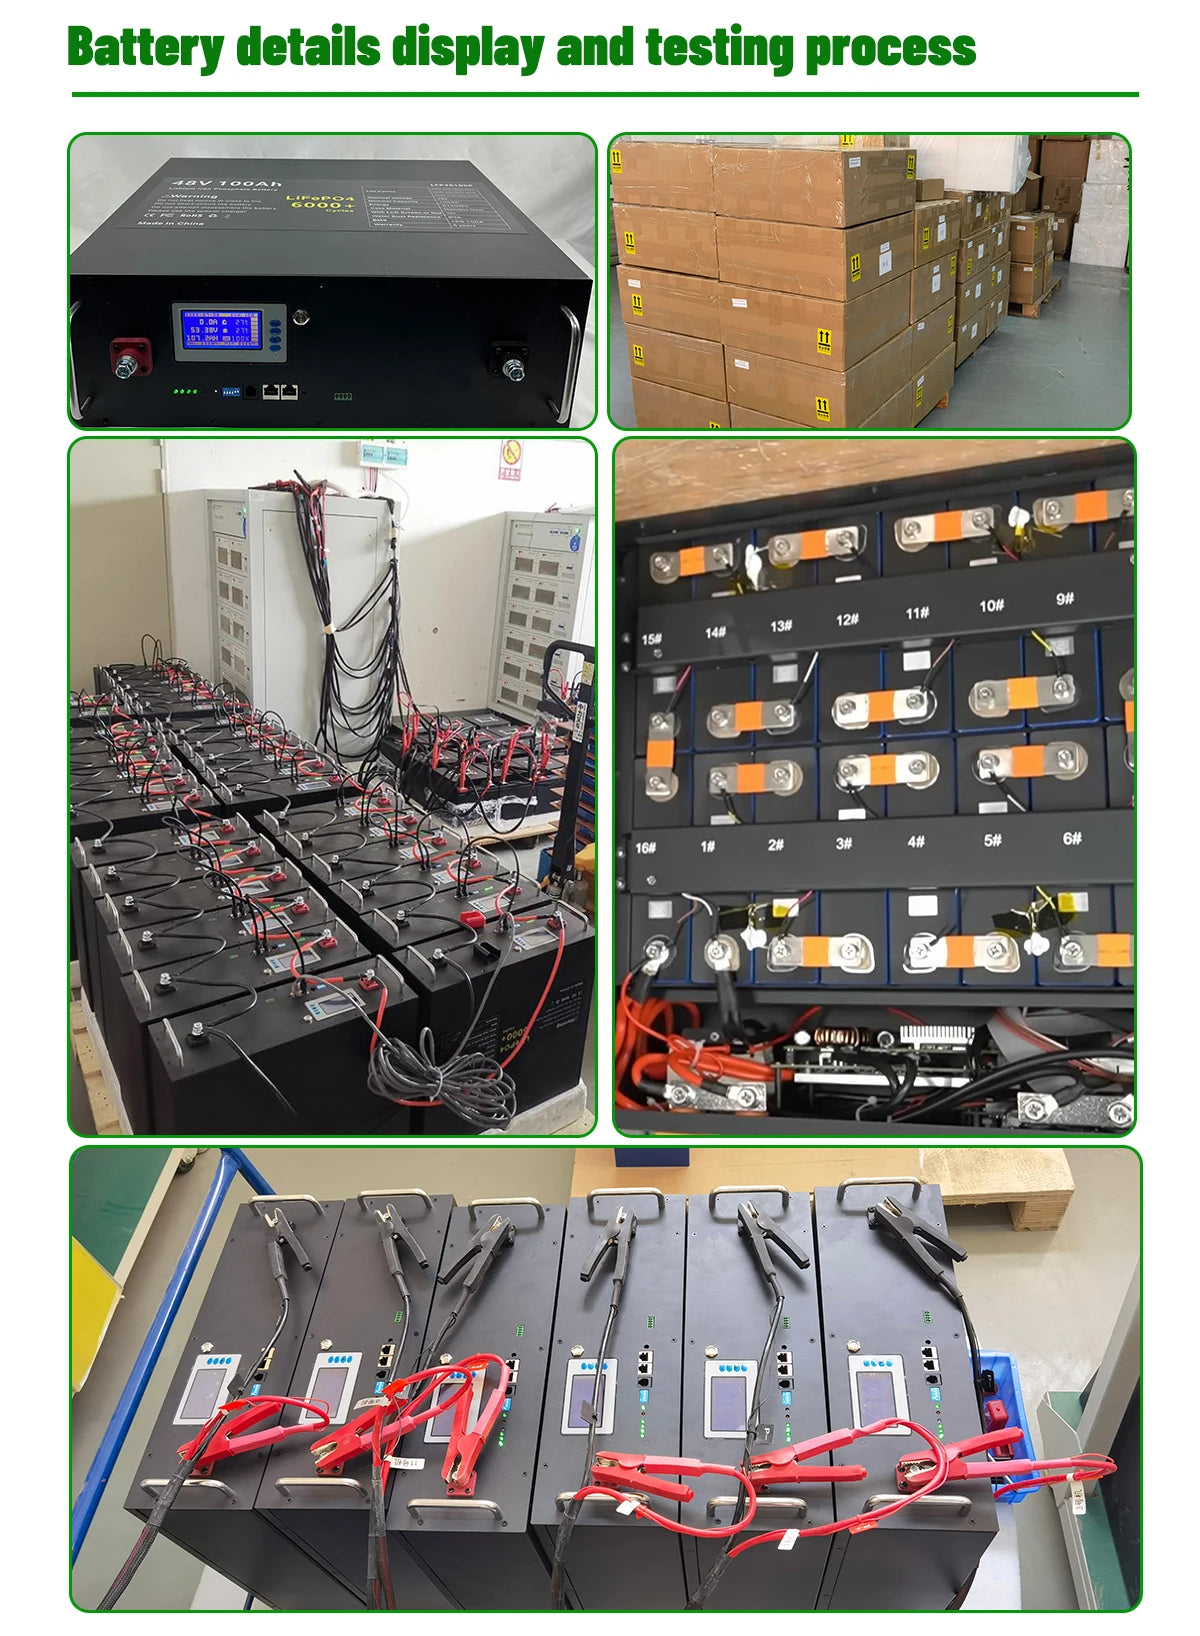 LiFePO4 48V 3KW Battery, High-performance 48V, 3kW LiFePO4 battery pack for display and testing results.